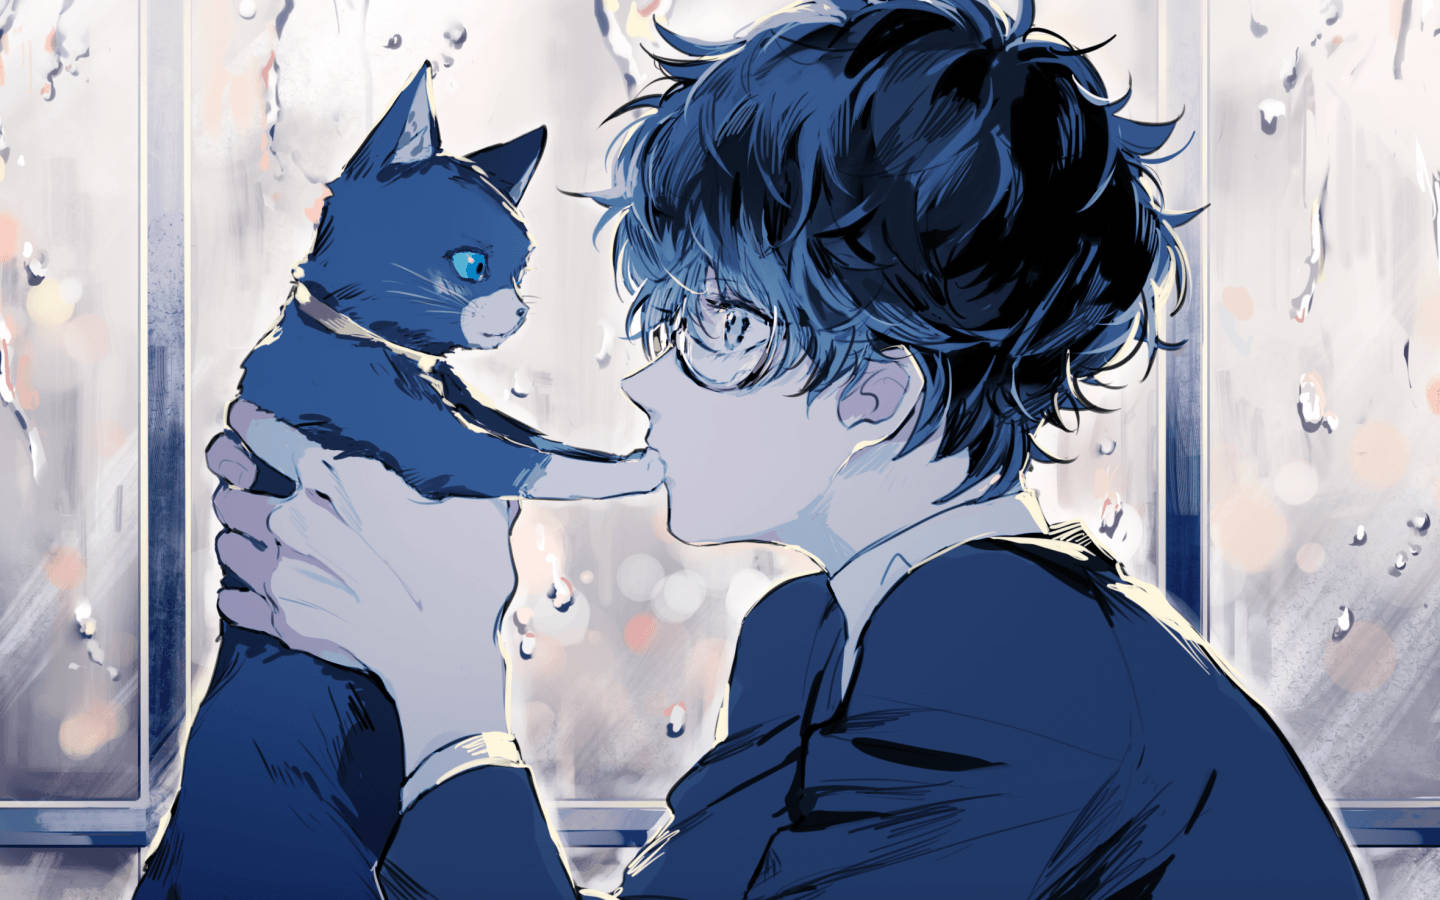 Cute Anime Guy And Blue Cat